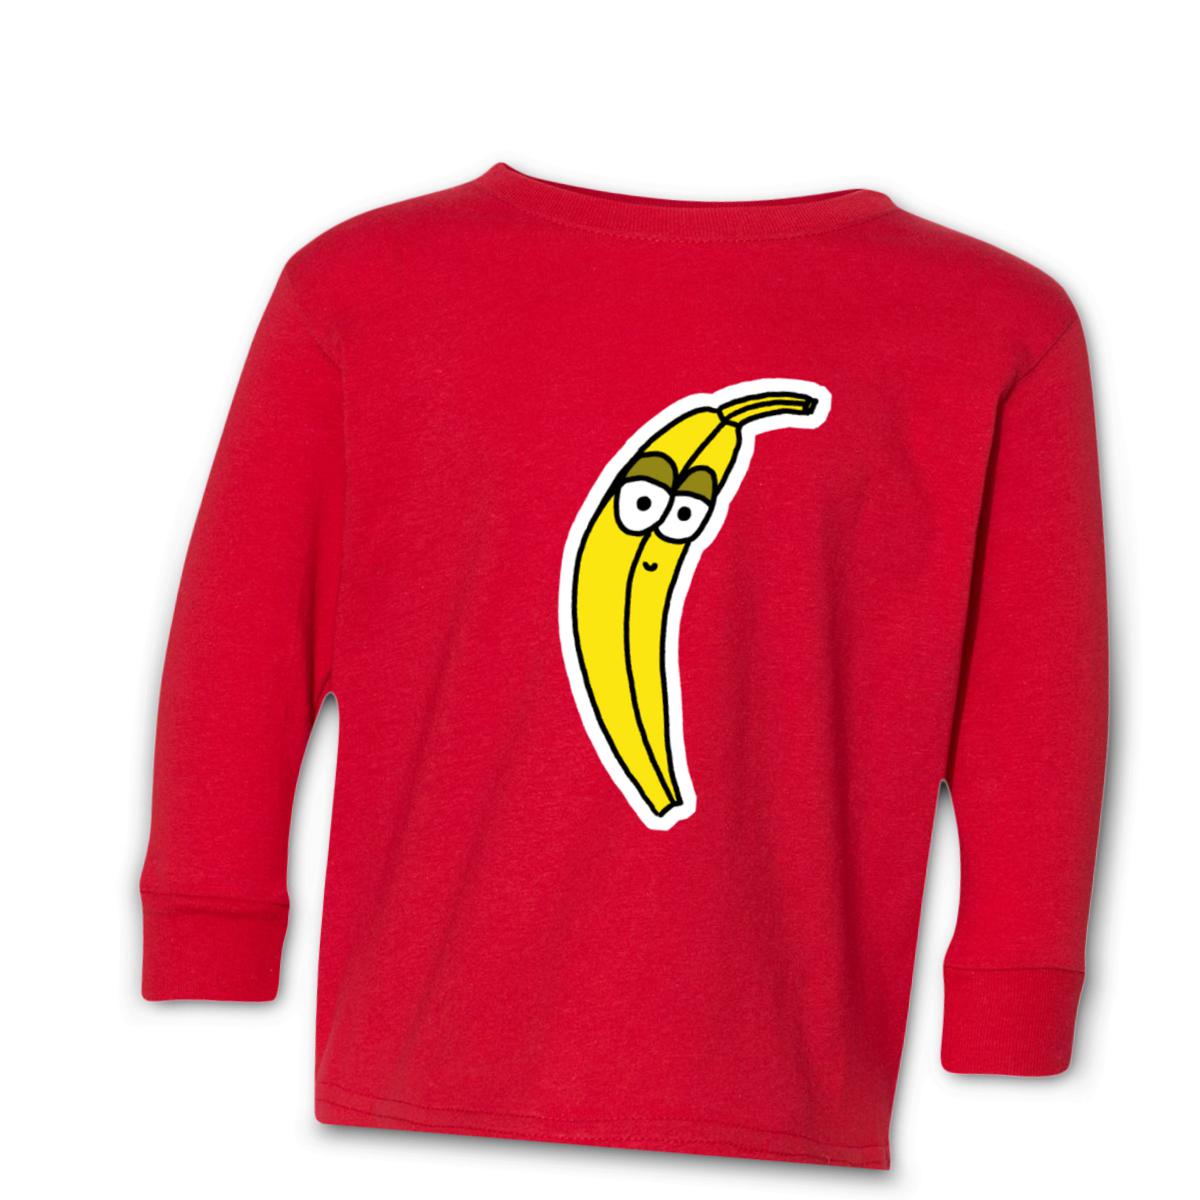 Plantain Kid's Long Sleeve Tee Large red